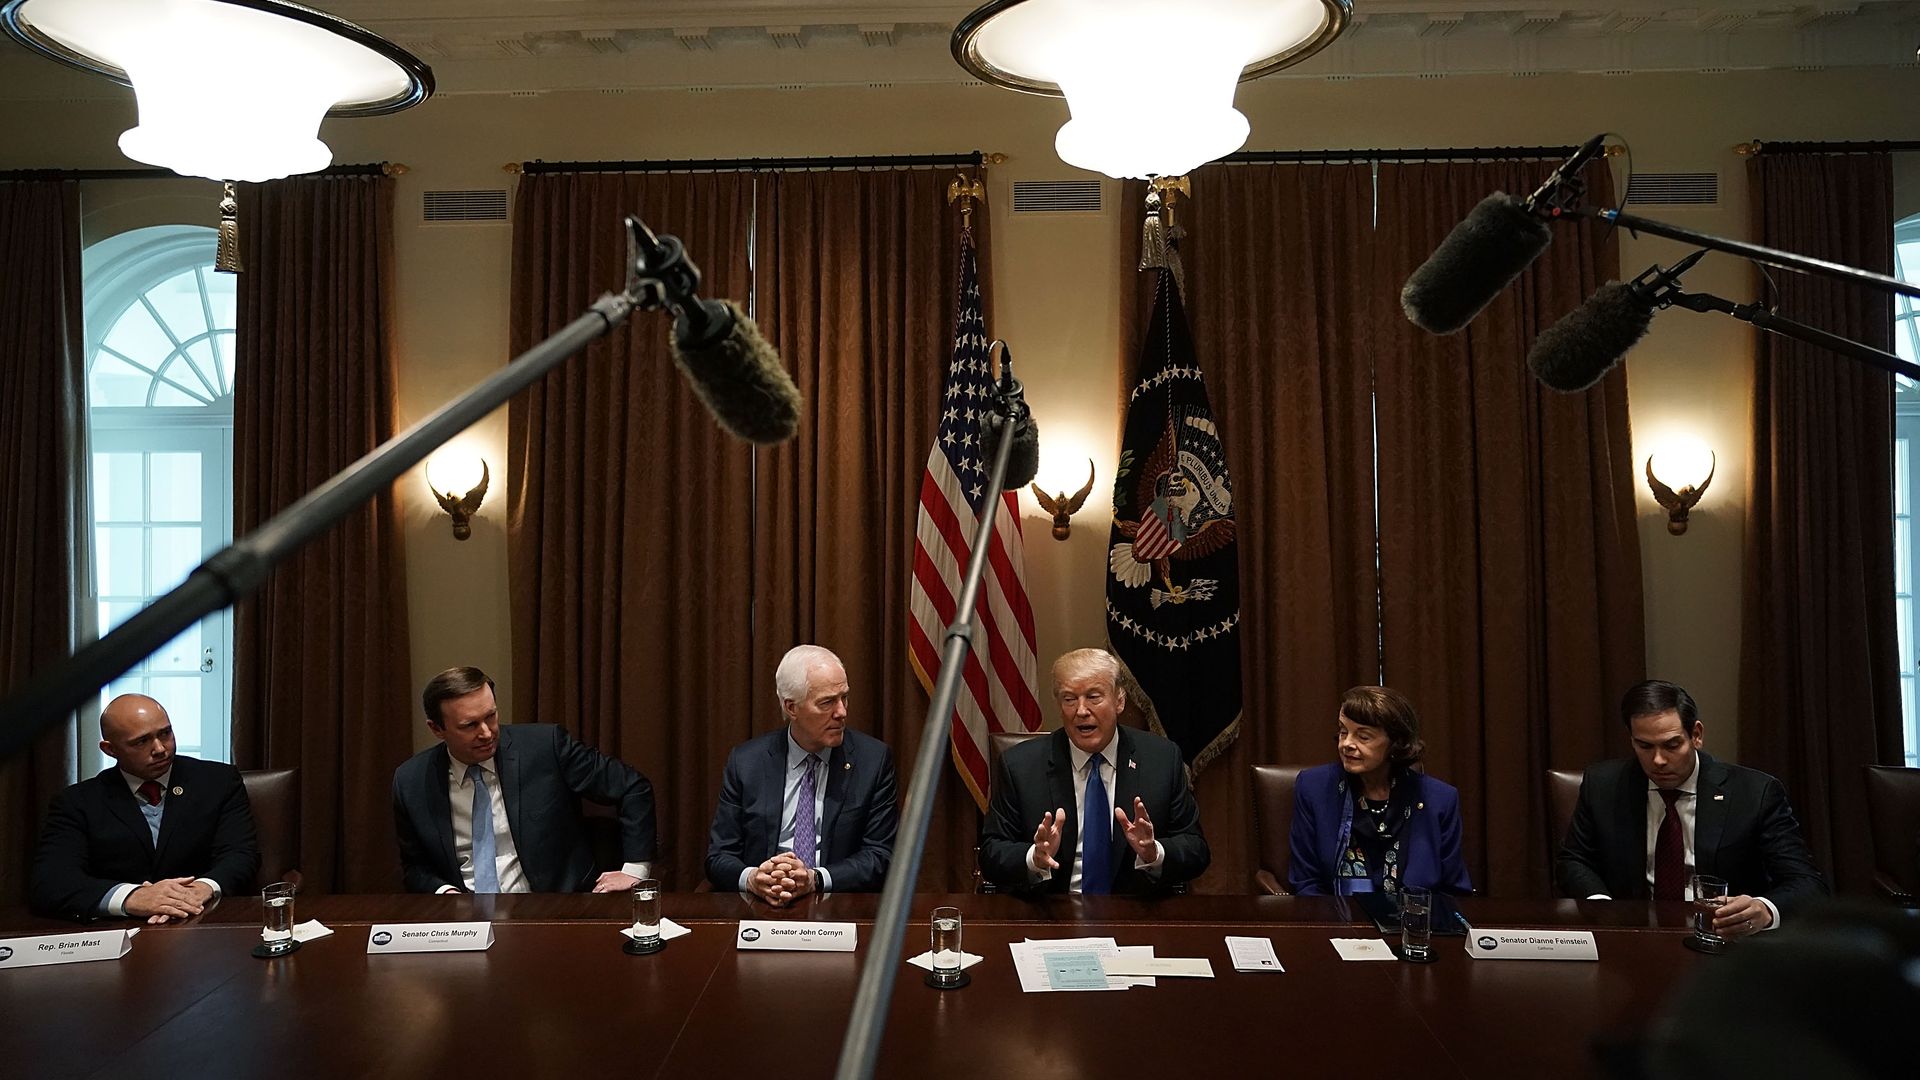 President Trump meets with bipartisan members of Congress.